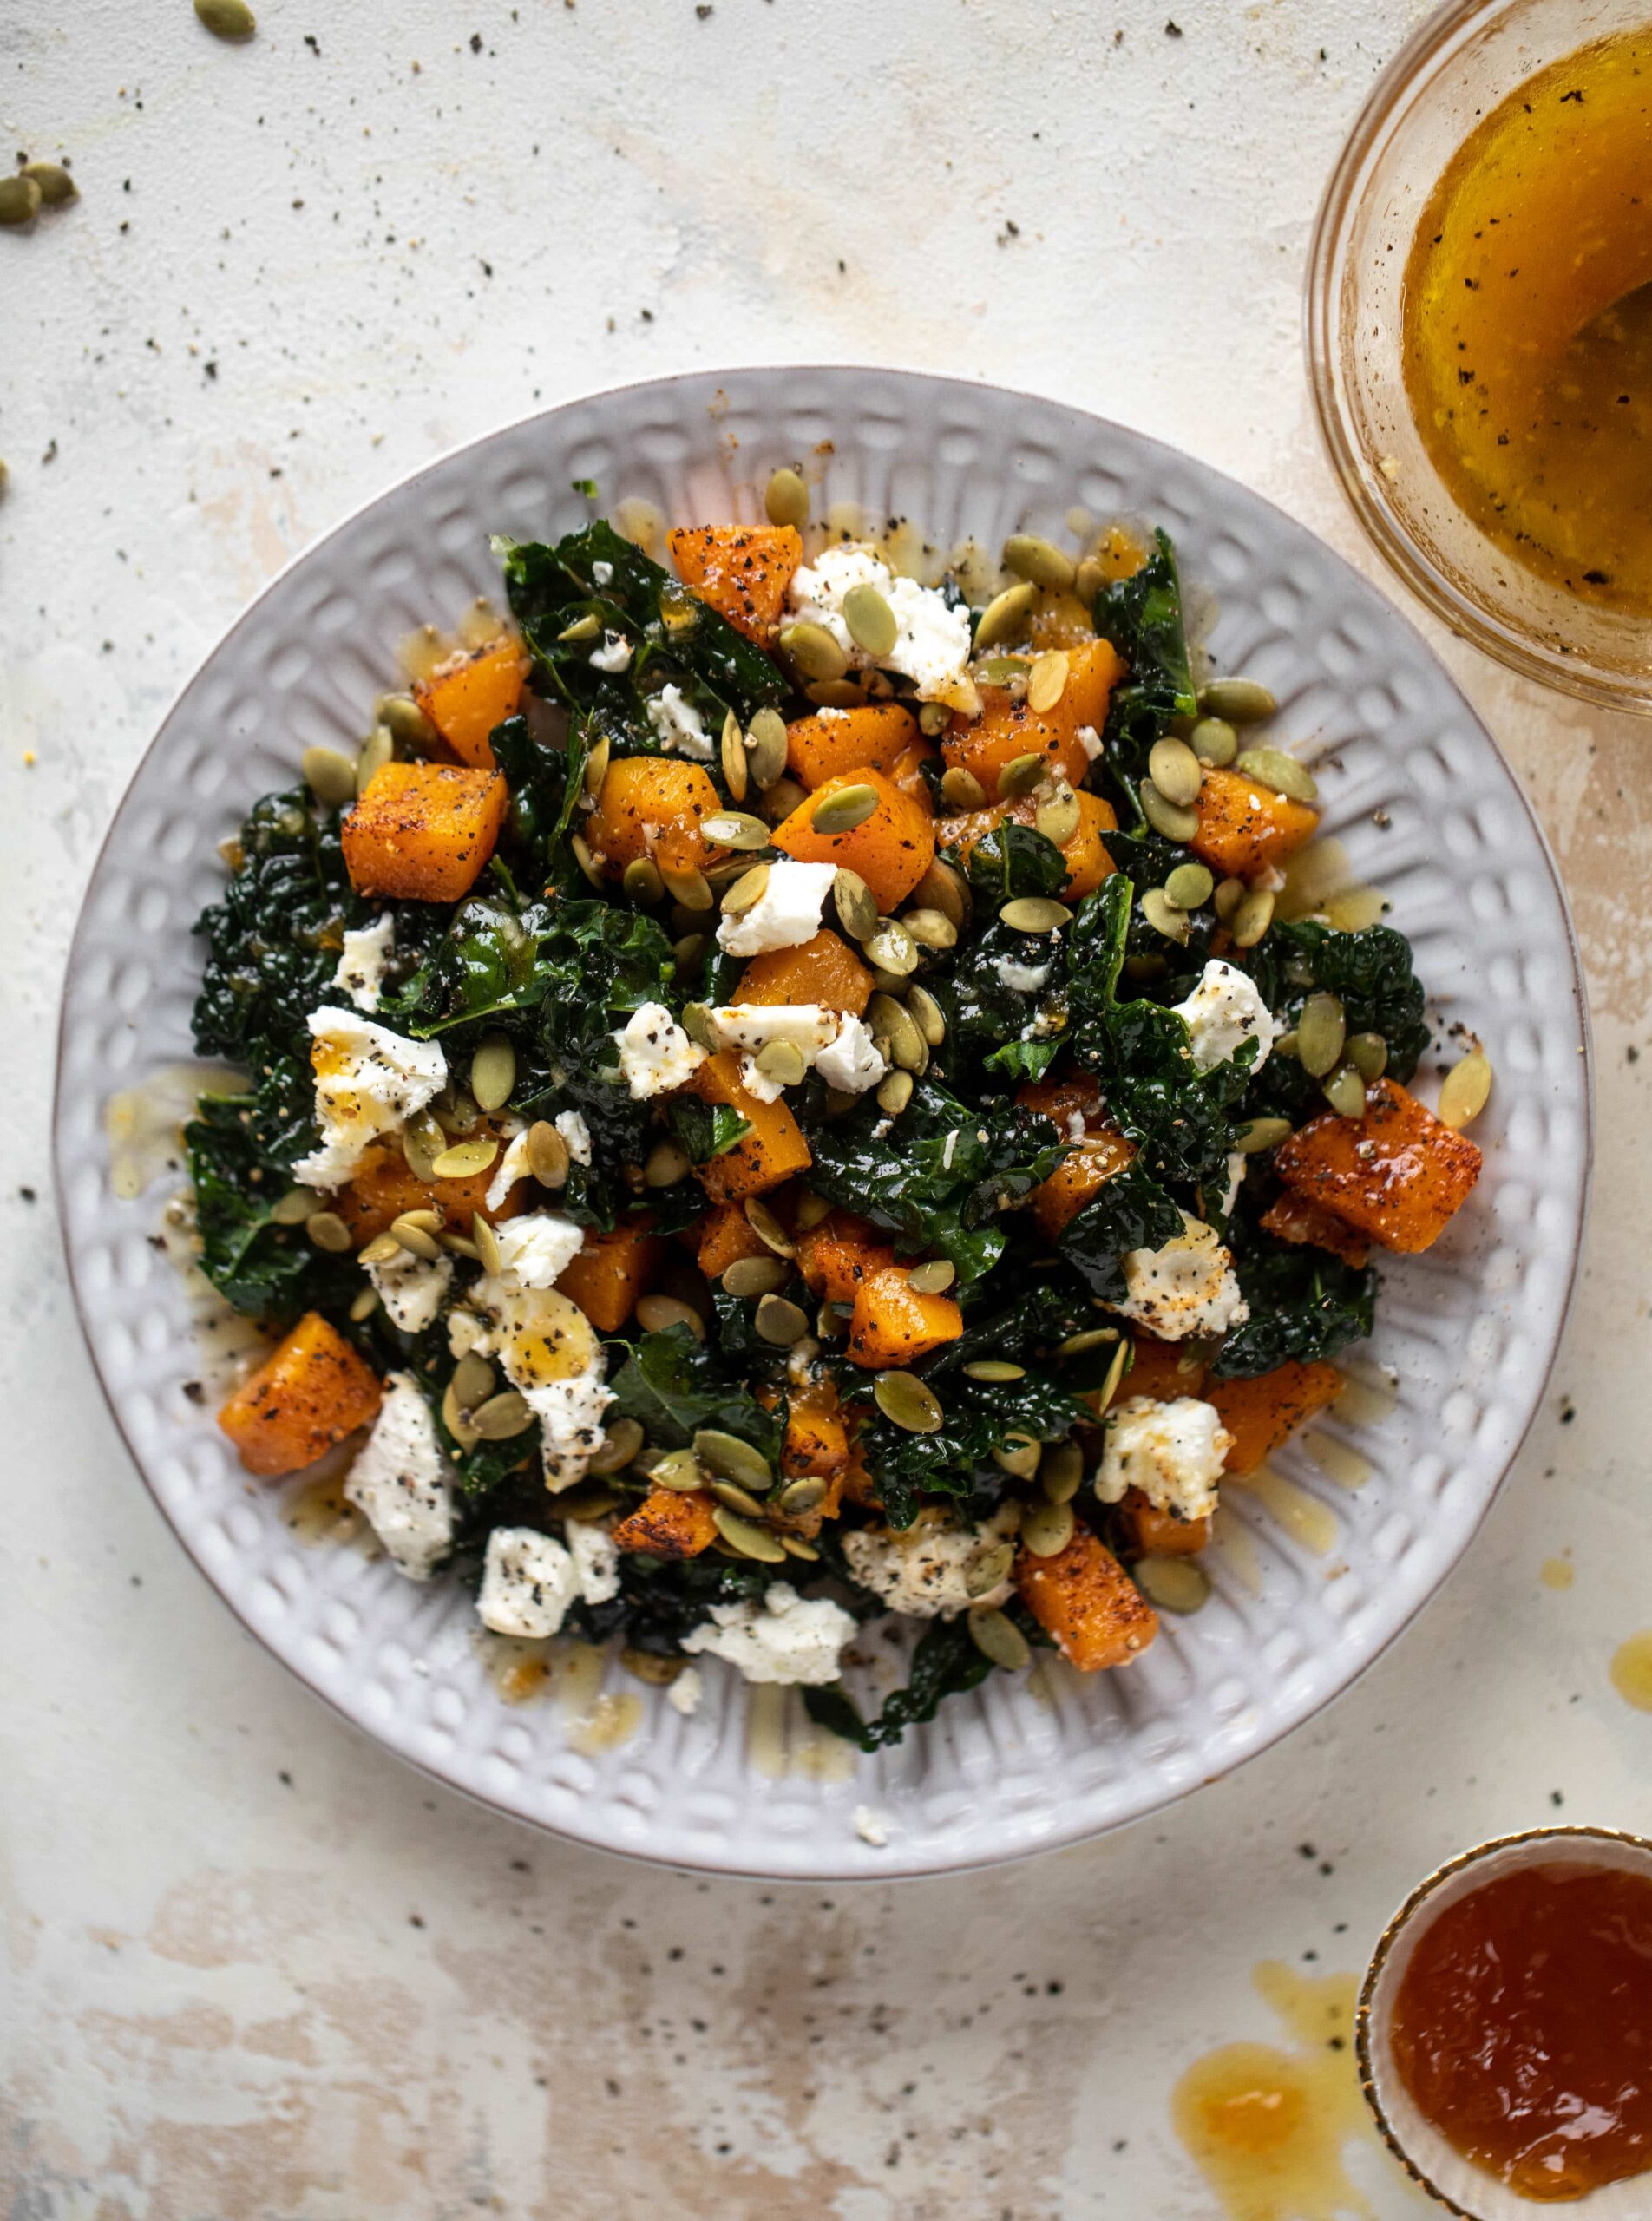 SMOKY BUTTERNUT KALE SALAD WITH GOAT CHEESE AND APRICOT VINAIGRETTE.